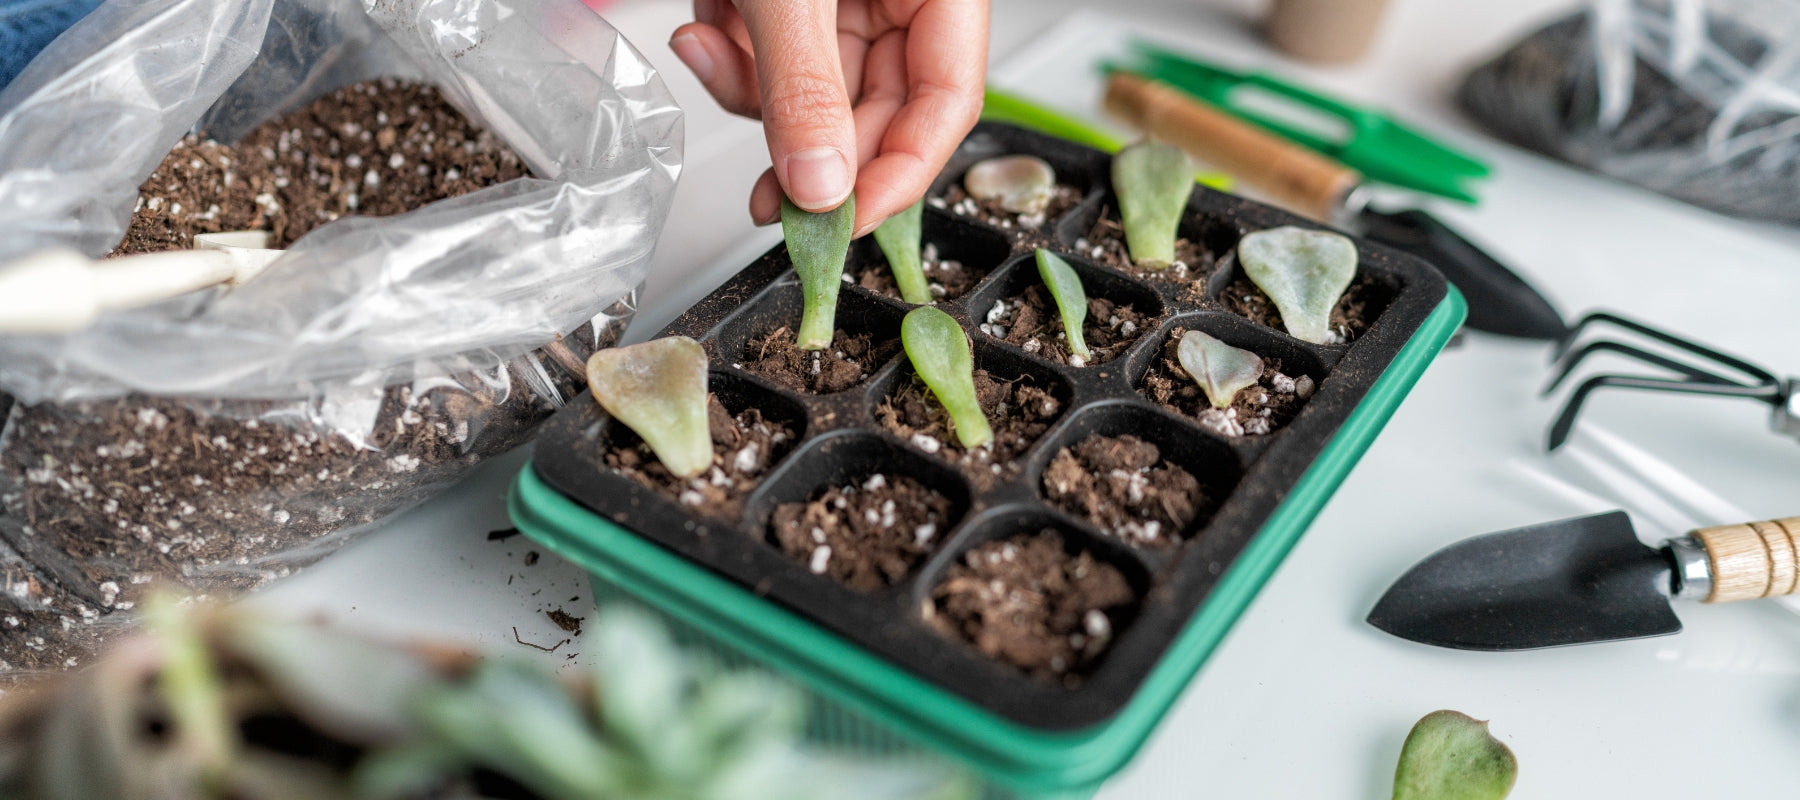 Propagation Made Easy: Video